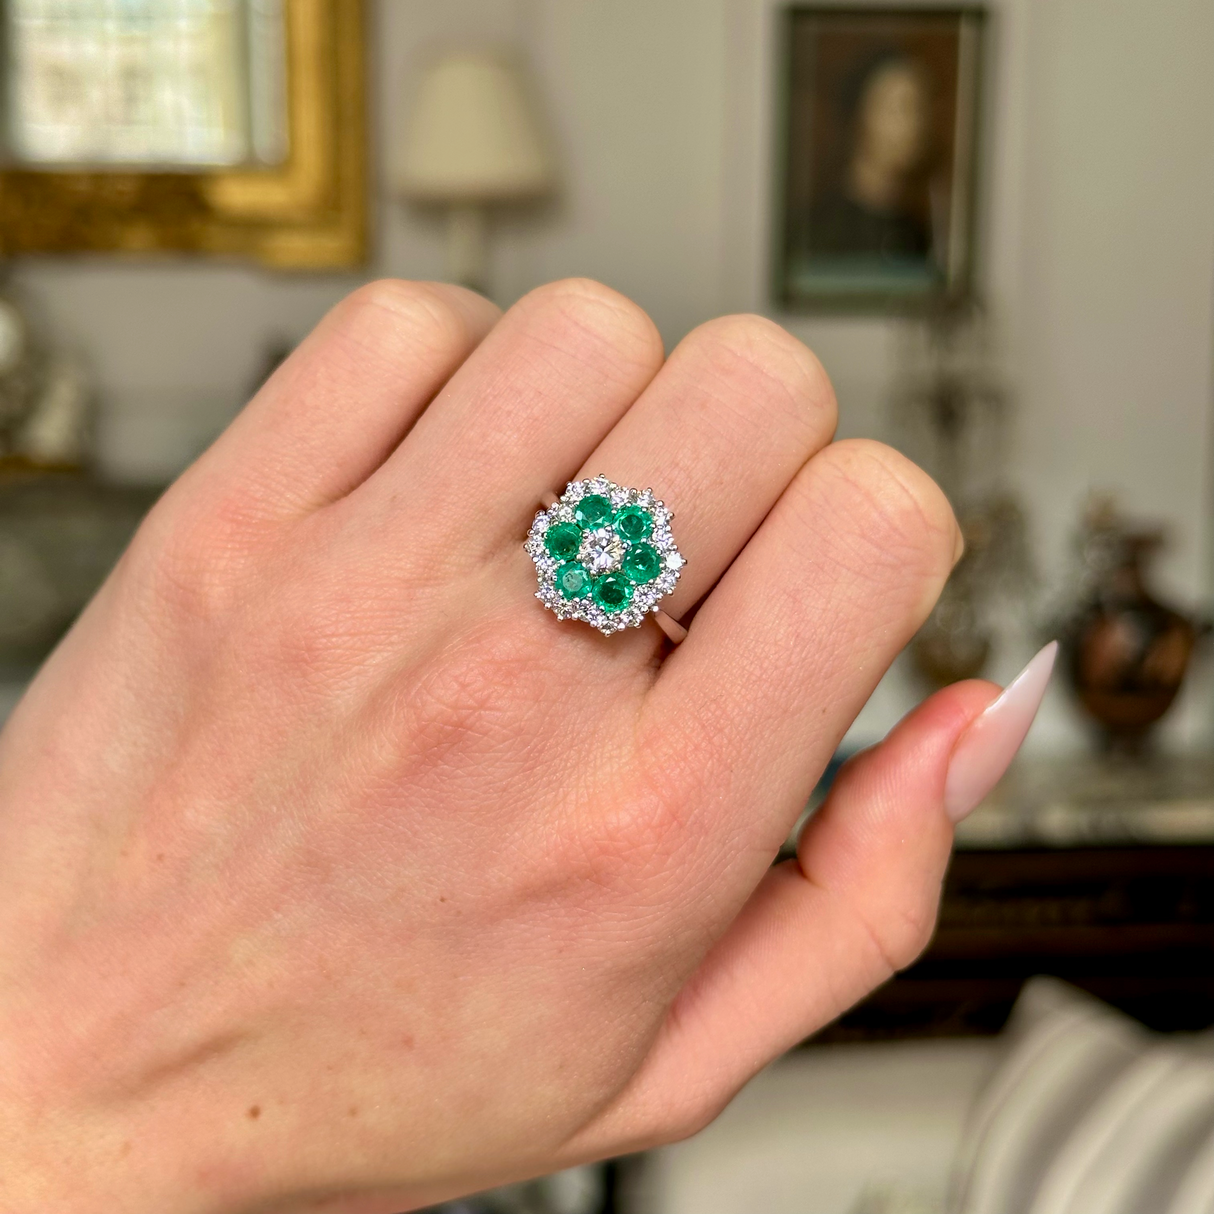 Vintage emerald and diamond cluster ring worn on closed hand, front view. 